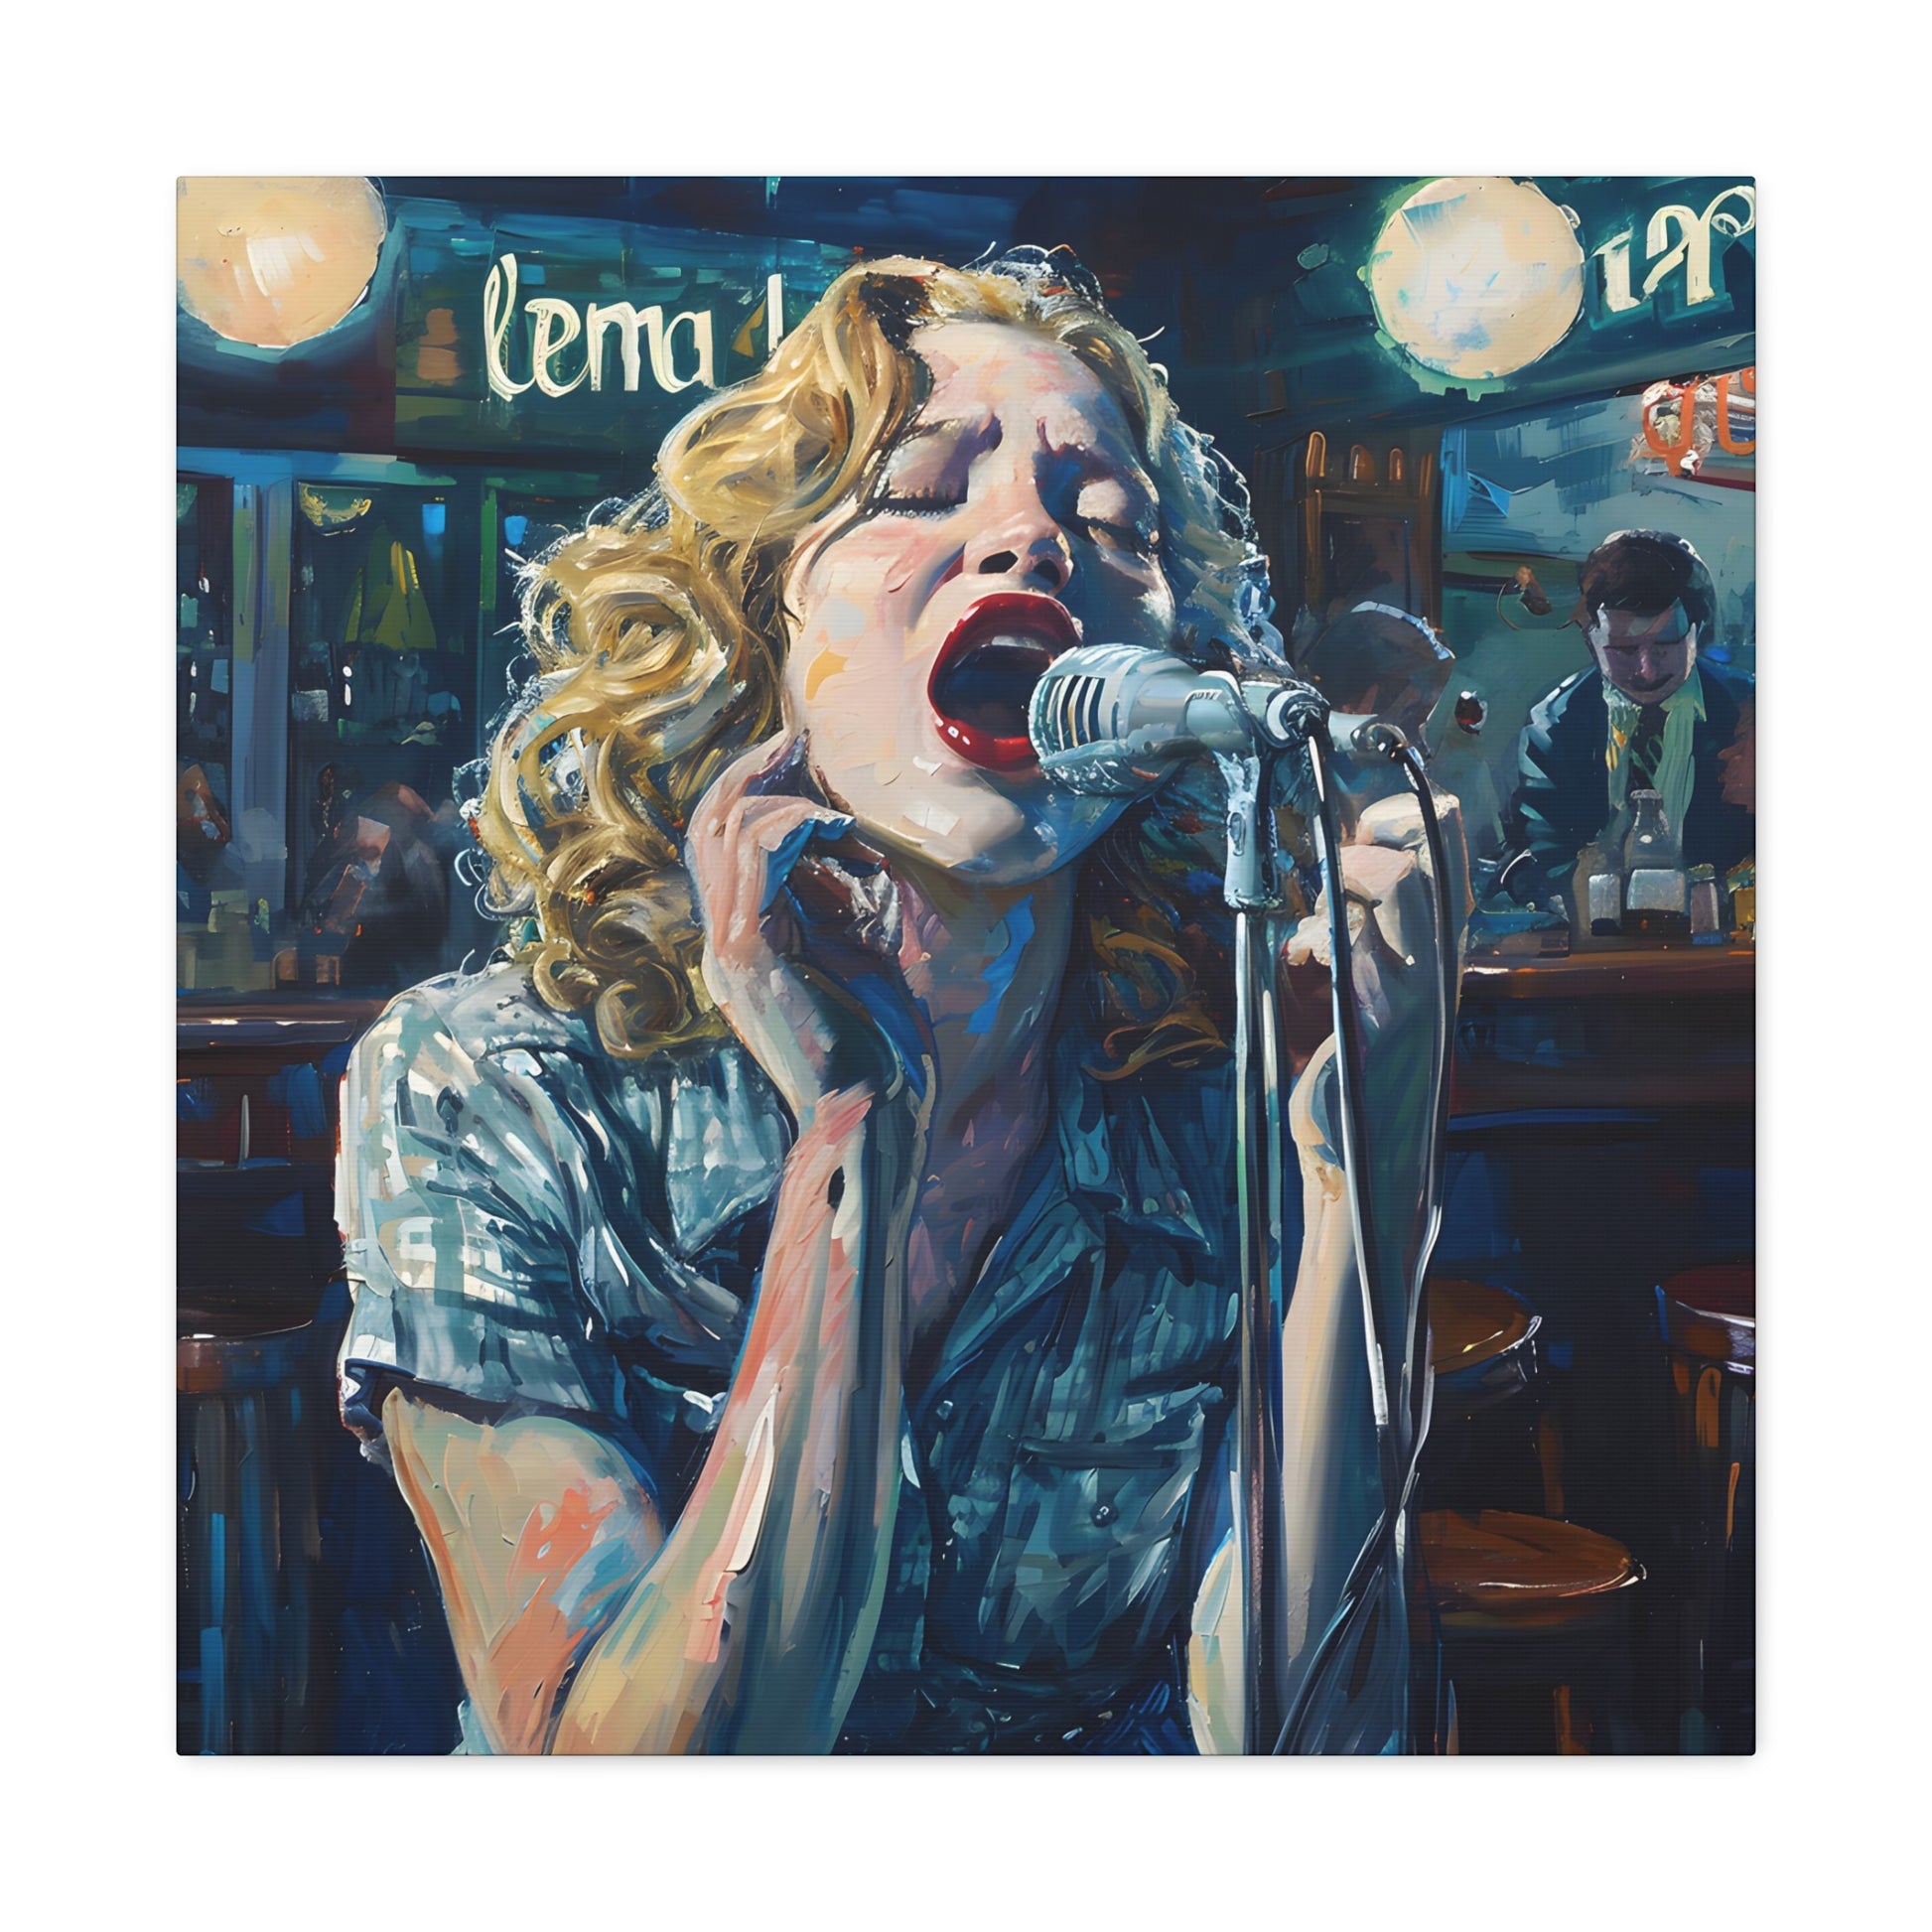 Artwork evoking 'American Pie' by Don McLean, with a singer's expressive performance reflecting the song's themes of innocence lost and enduring music, set in a moody, dimly lit bar ambiance.